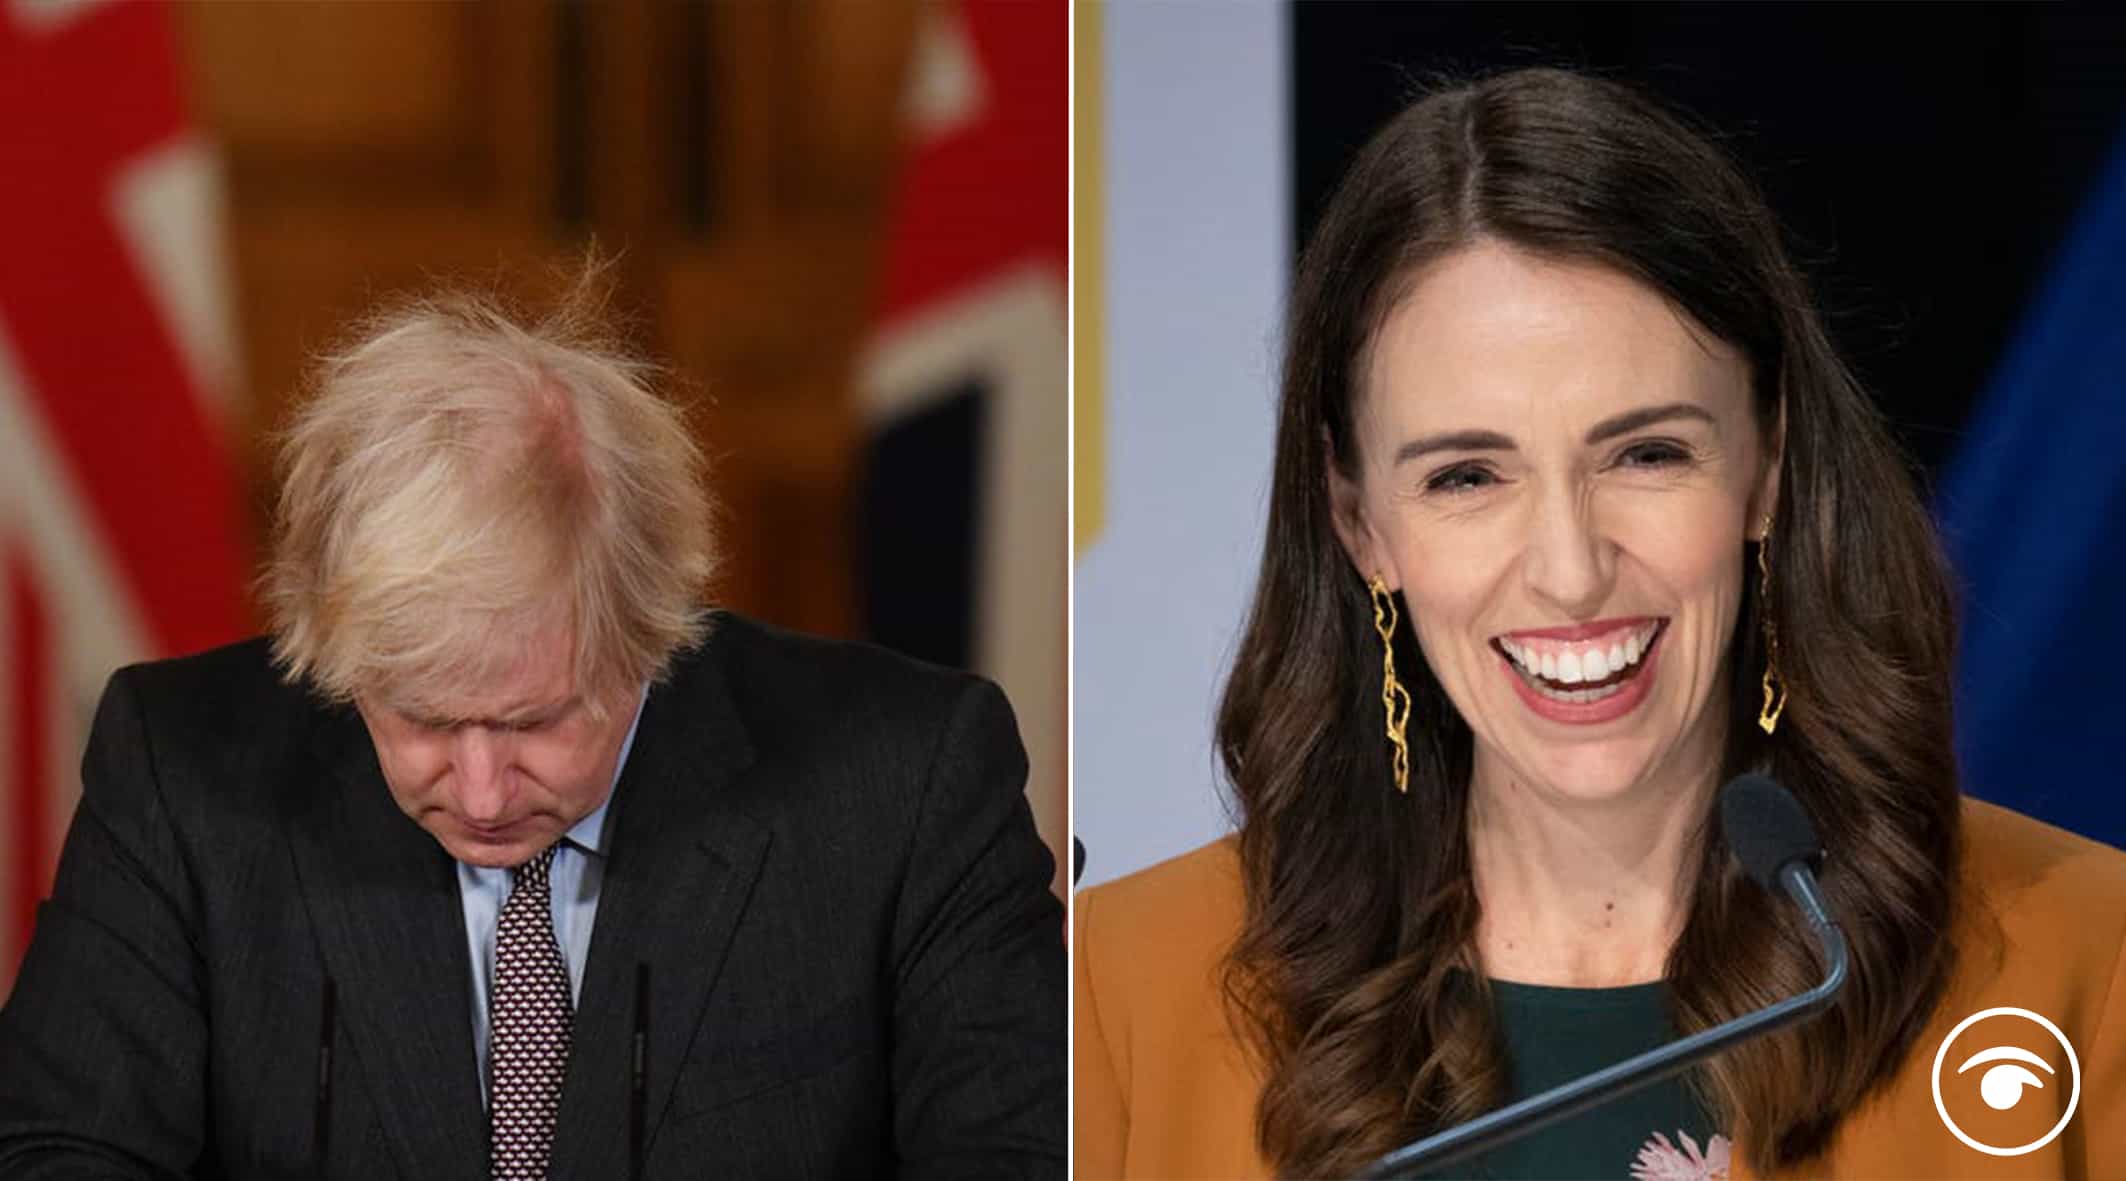 Not content with flattening the curve, Jacinda Ardern went beyond “doing everything she could”